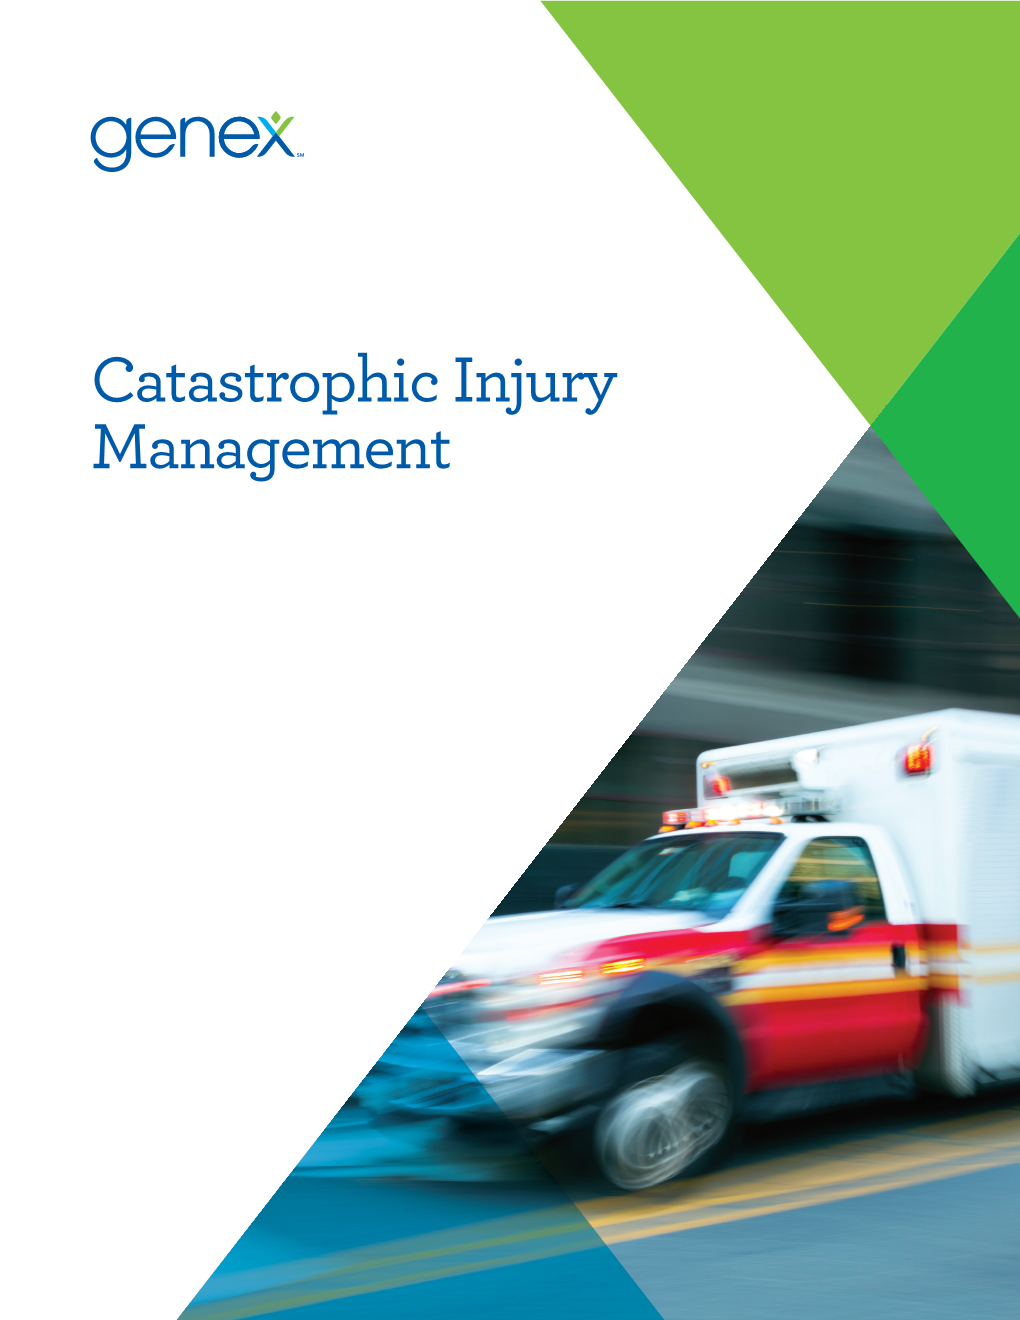 Catastrophic Injury Management Genex Manages More Than 1,200 Catastrophic Cases Annually